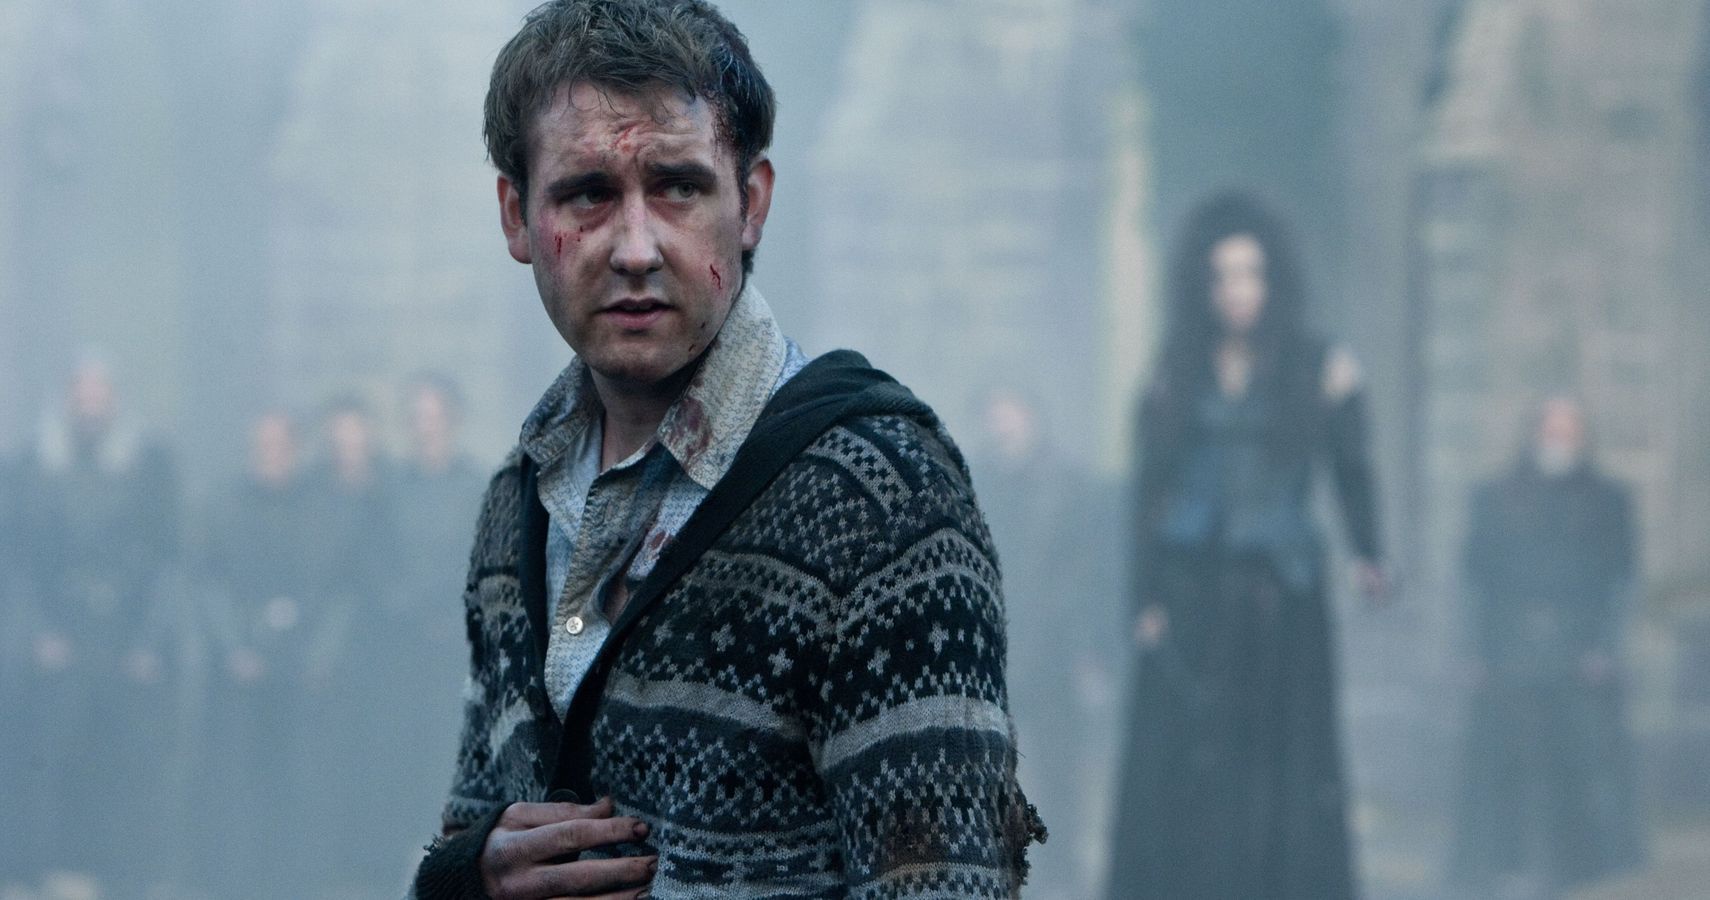 Neville Longbottom in Harry Potter and the Deathly Hallows Part 2